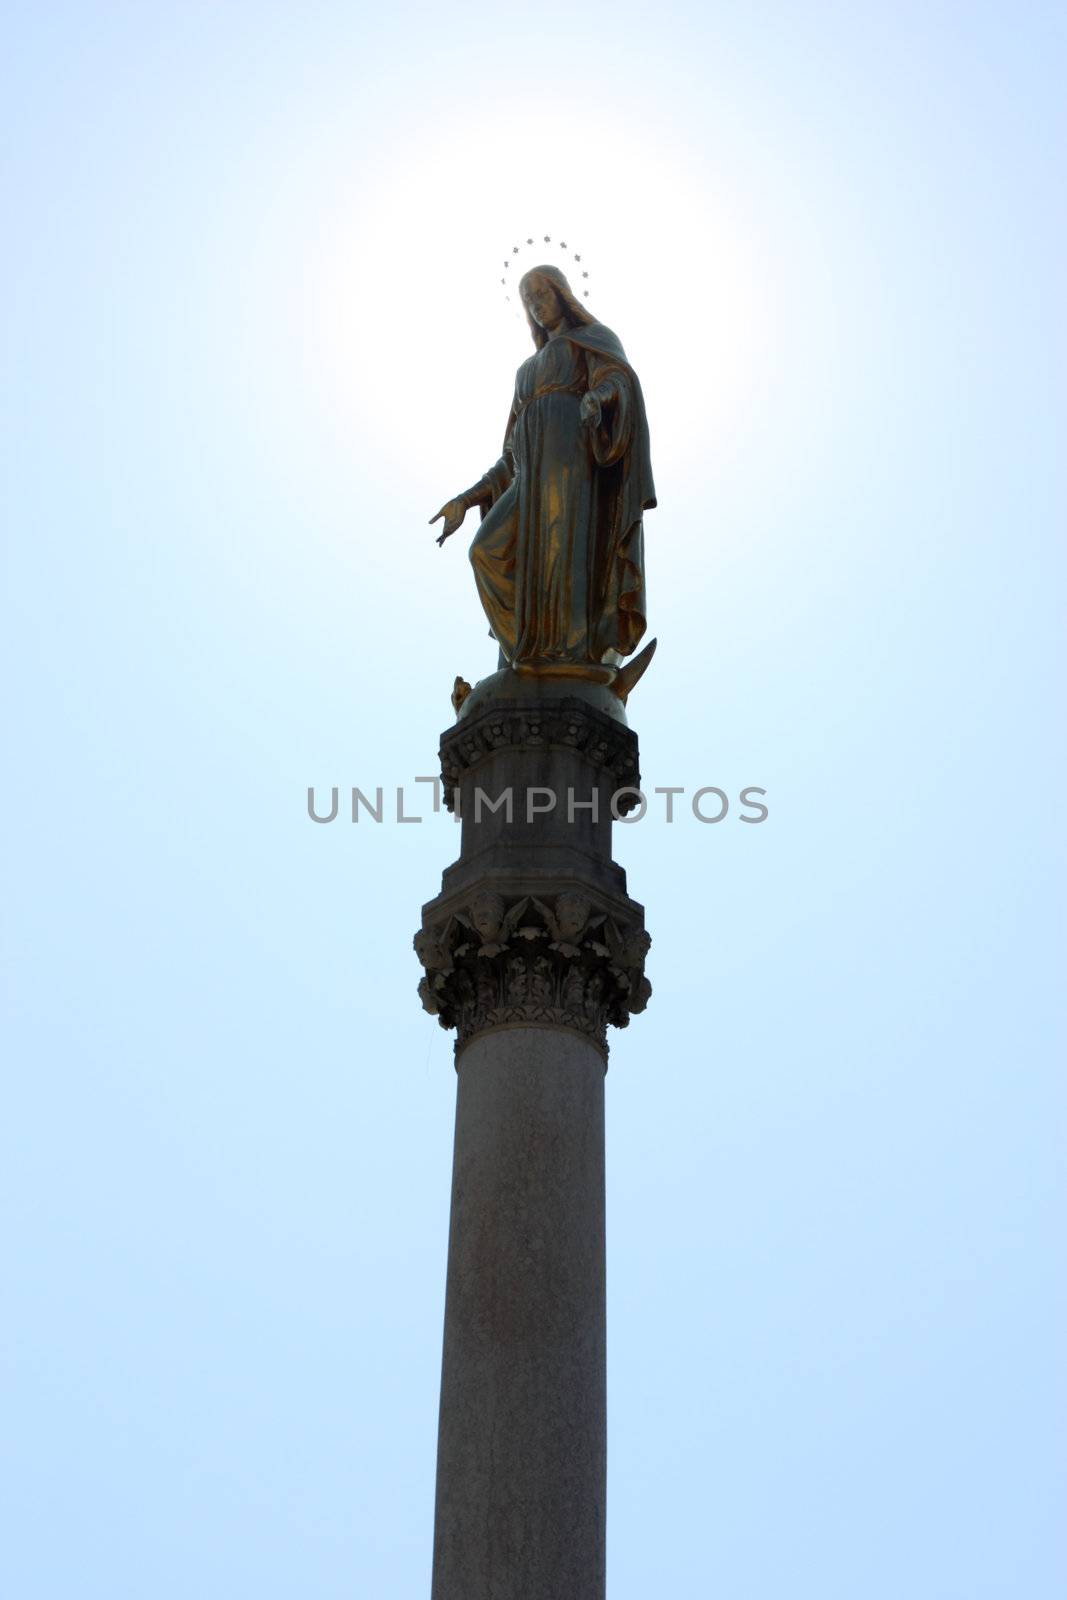 Statue of the Blessed Virgin Mary near cathedral in Zagreb, Croatia, with sun in background